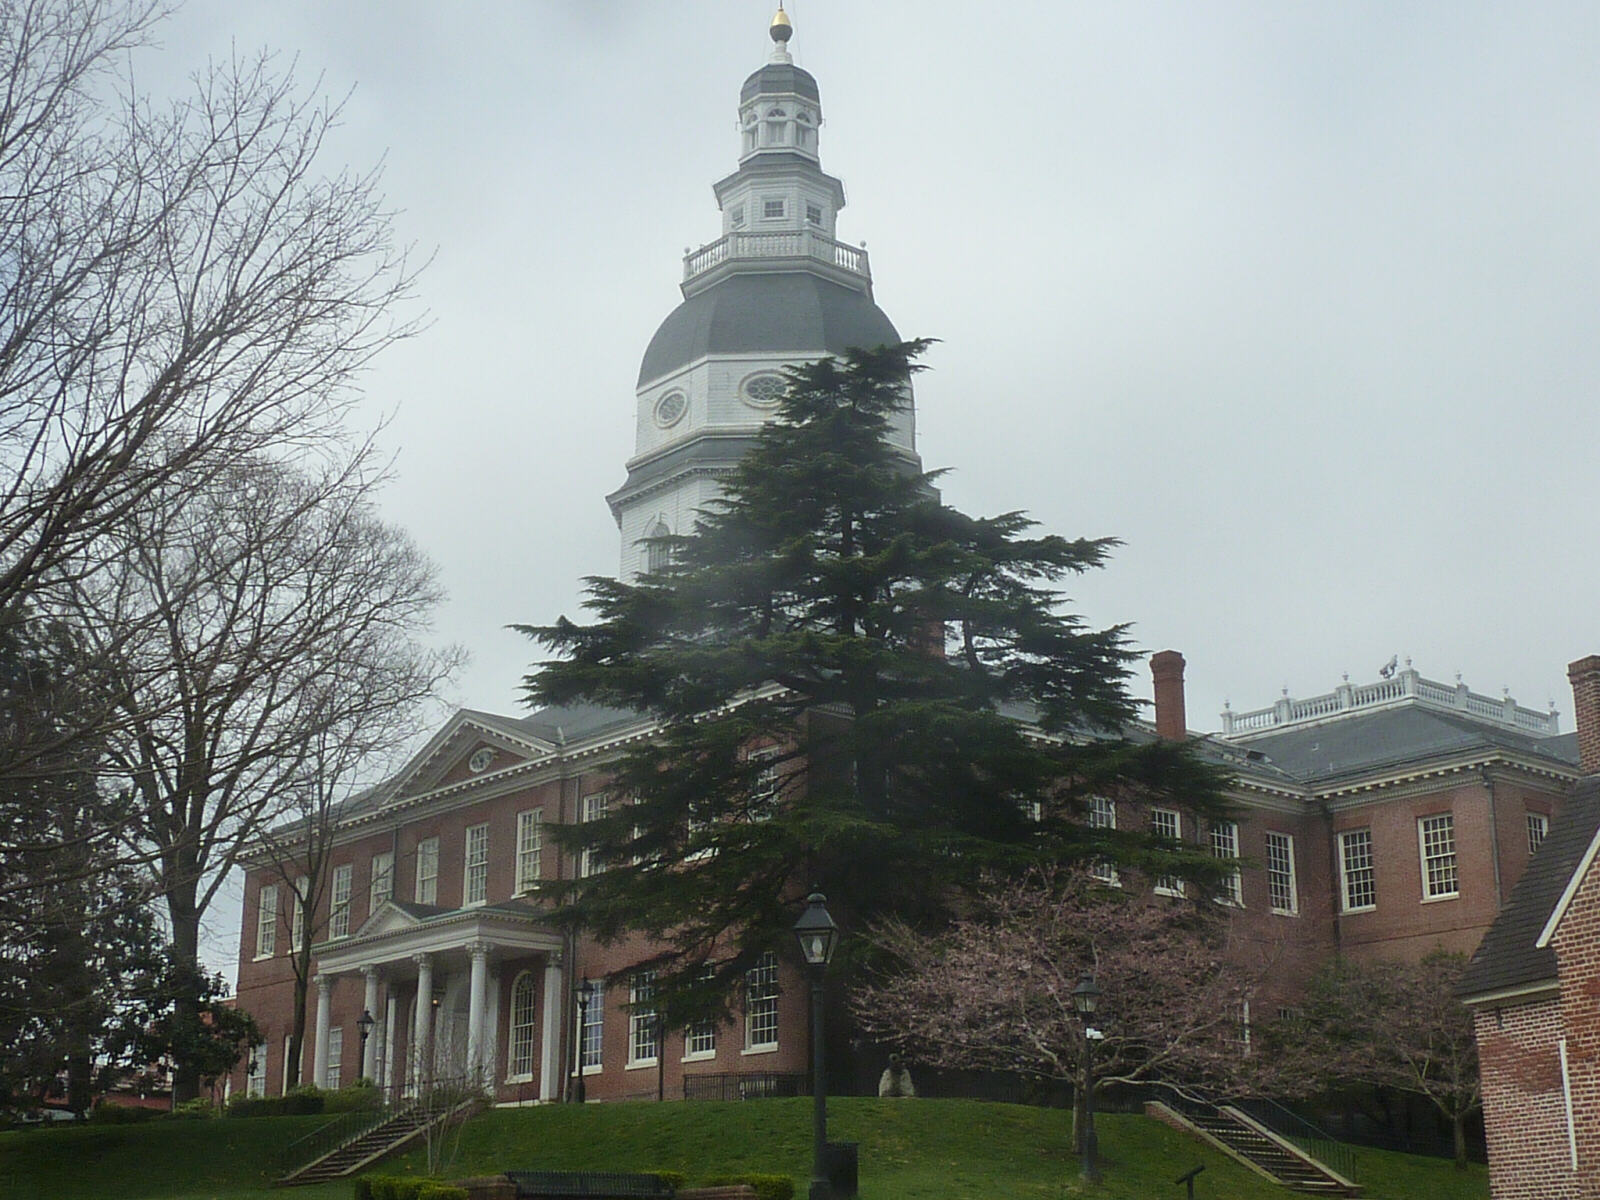 The Maryland State Capitol in Annapolis